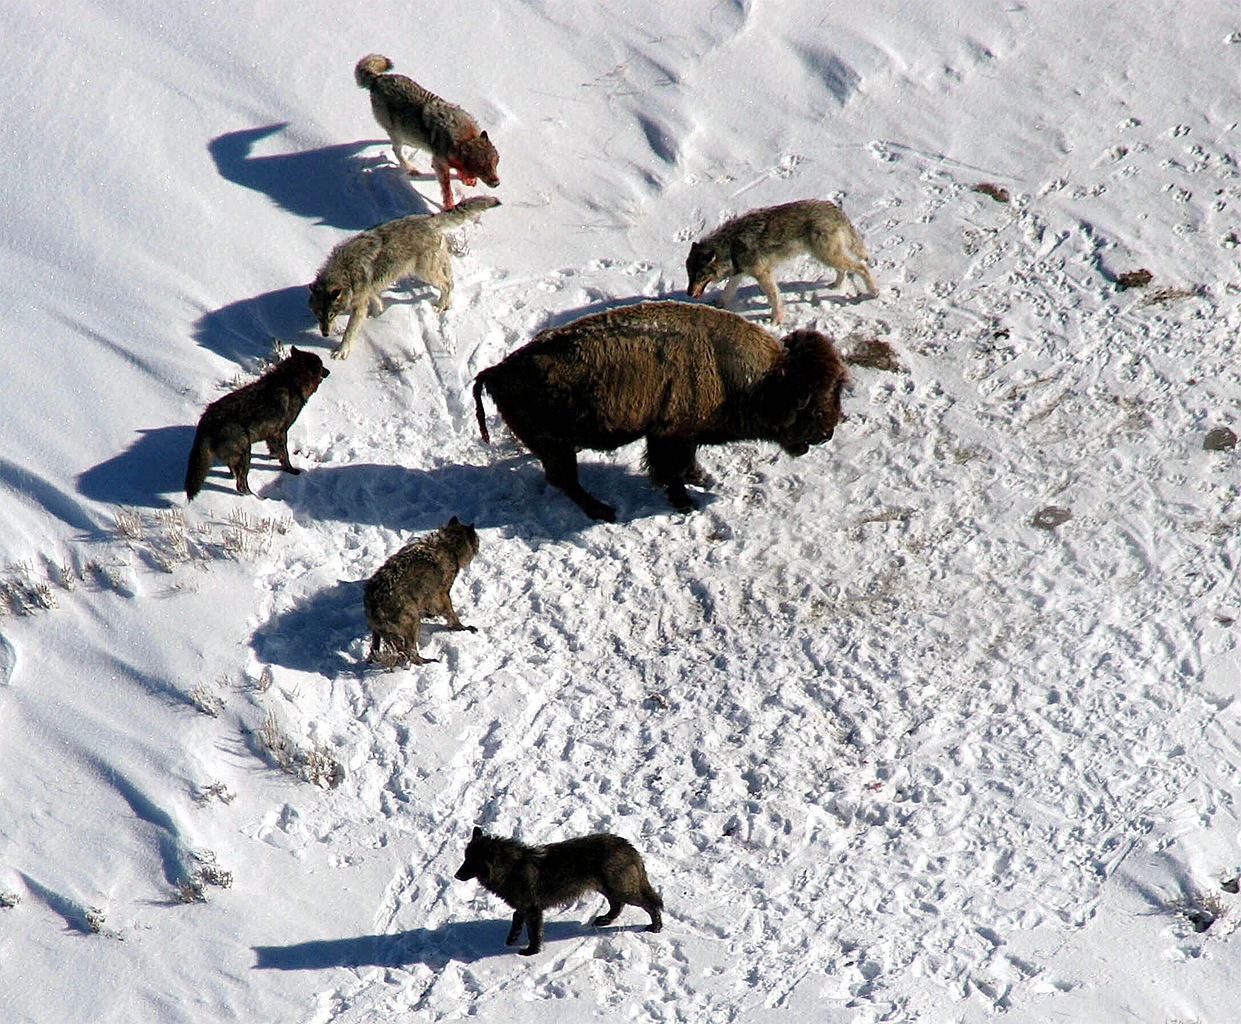 Wolves hunting a bison. Wolves are a pivotal predator, but their effect on carbon sequestration can be very different depending on the environment in which they’re hunting. Image by colfelly via RawPixel (Public domain).